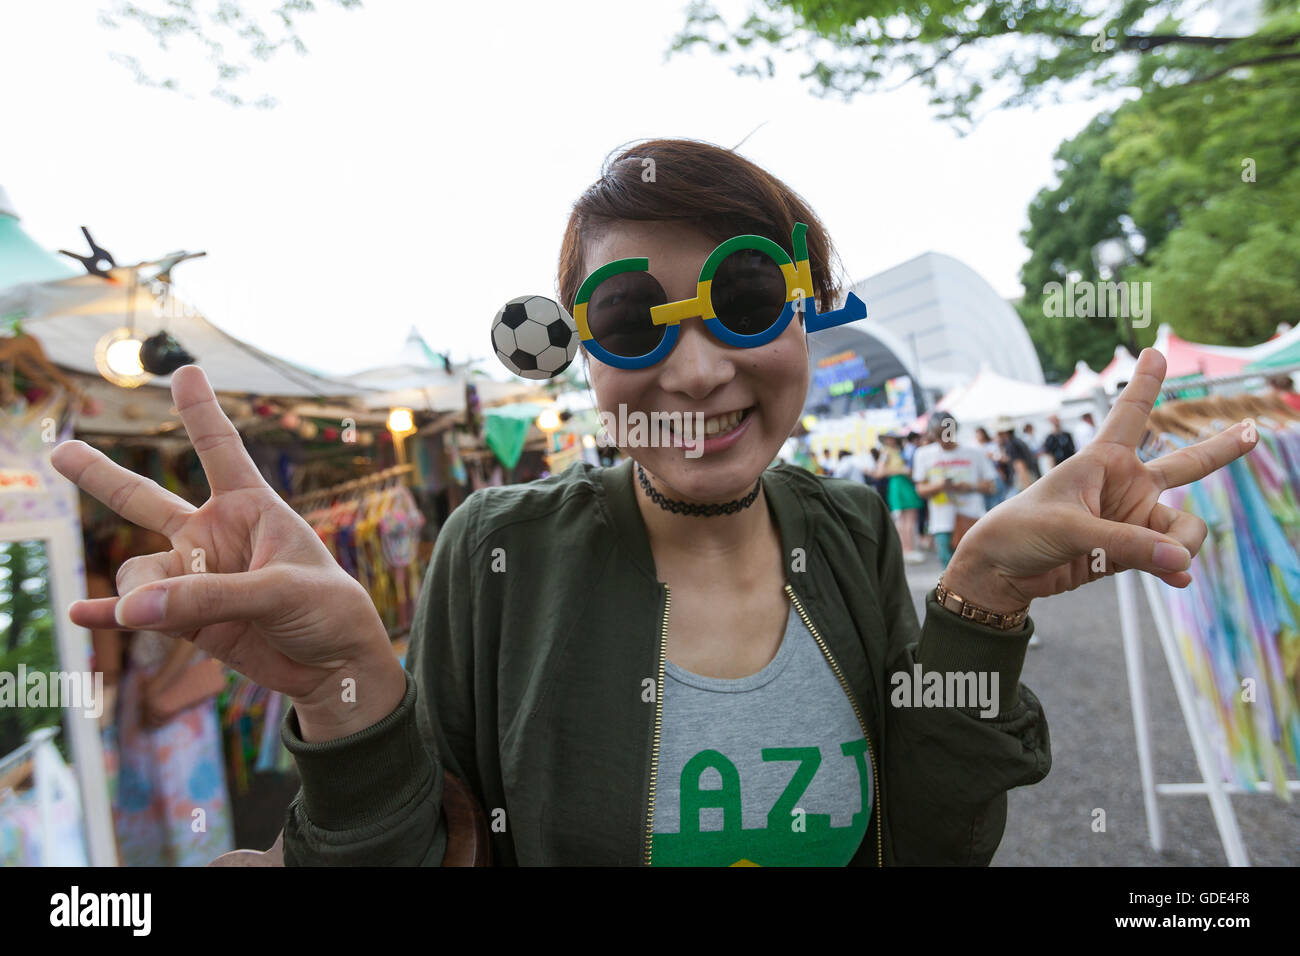 Tokyo, Japan. 16th July, 2016. A woman enjoys the Festival Brasil 2016 at Yoyogi Park on July 16, 2016, Tokyo, Japan. The annual festival brings together Brazilian food and entertainment including Samba and Capoeira performers. Organized by the Camara de Comercio Brasileira no Japao the event runs until July 17. The Brazilian community is the third largest immigrant population in Japan. Credit:  Rodrigo Reyes Marin/AFLO/Alamy Live News Stock Photo